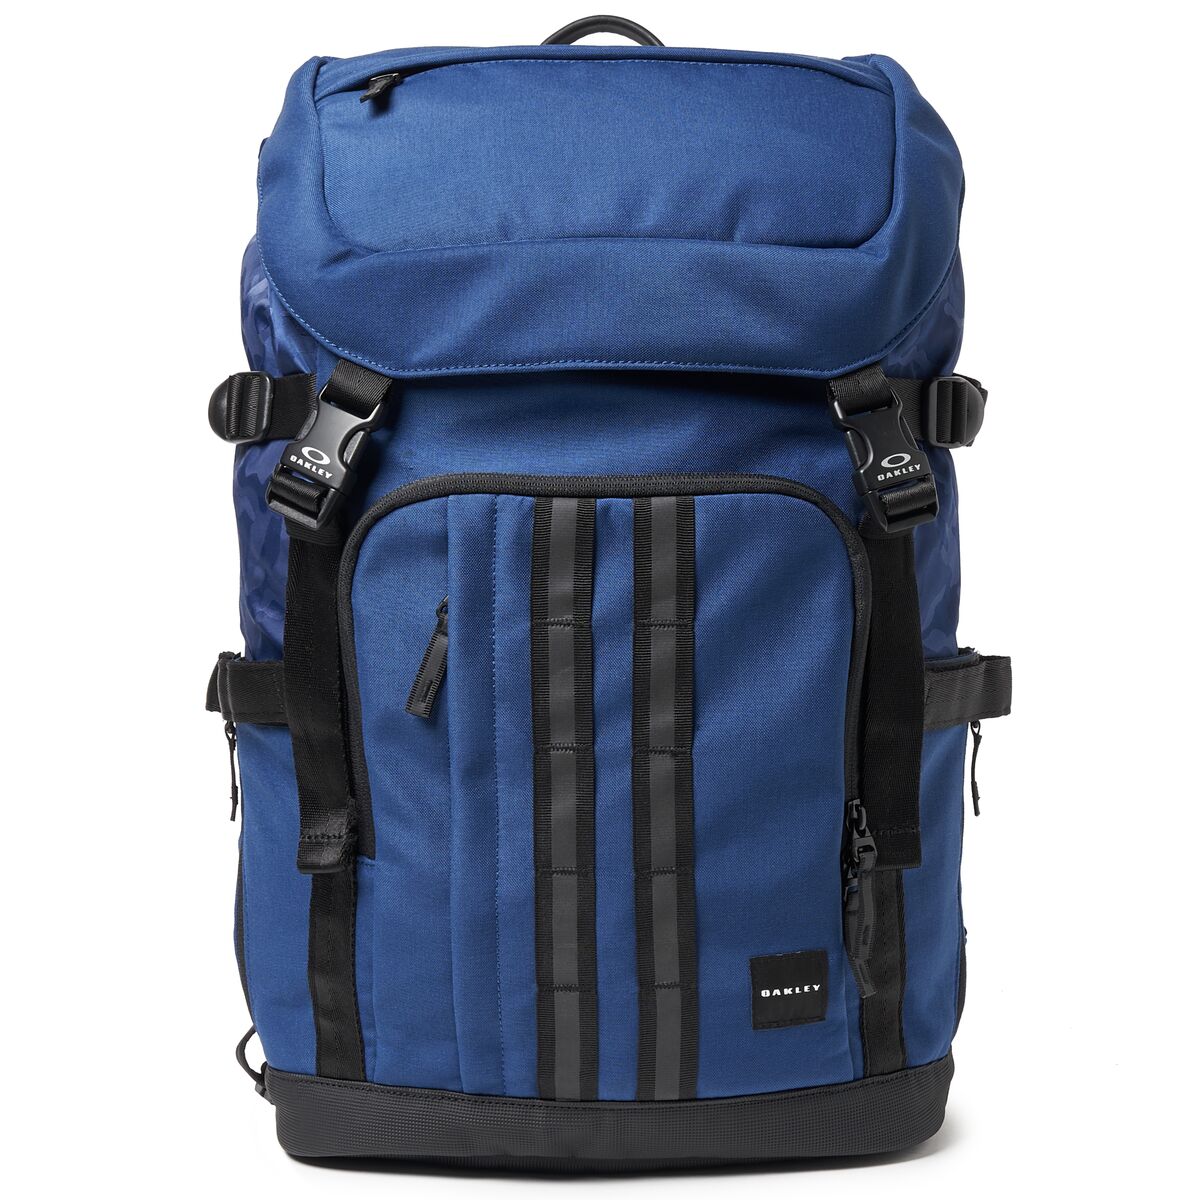 Reviews & Ratings for Oakley Utility Organizing Backpack - Men's